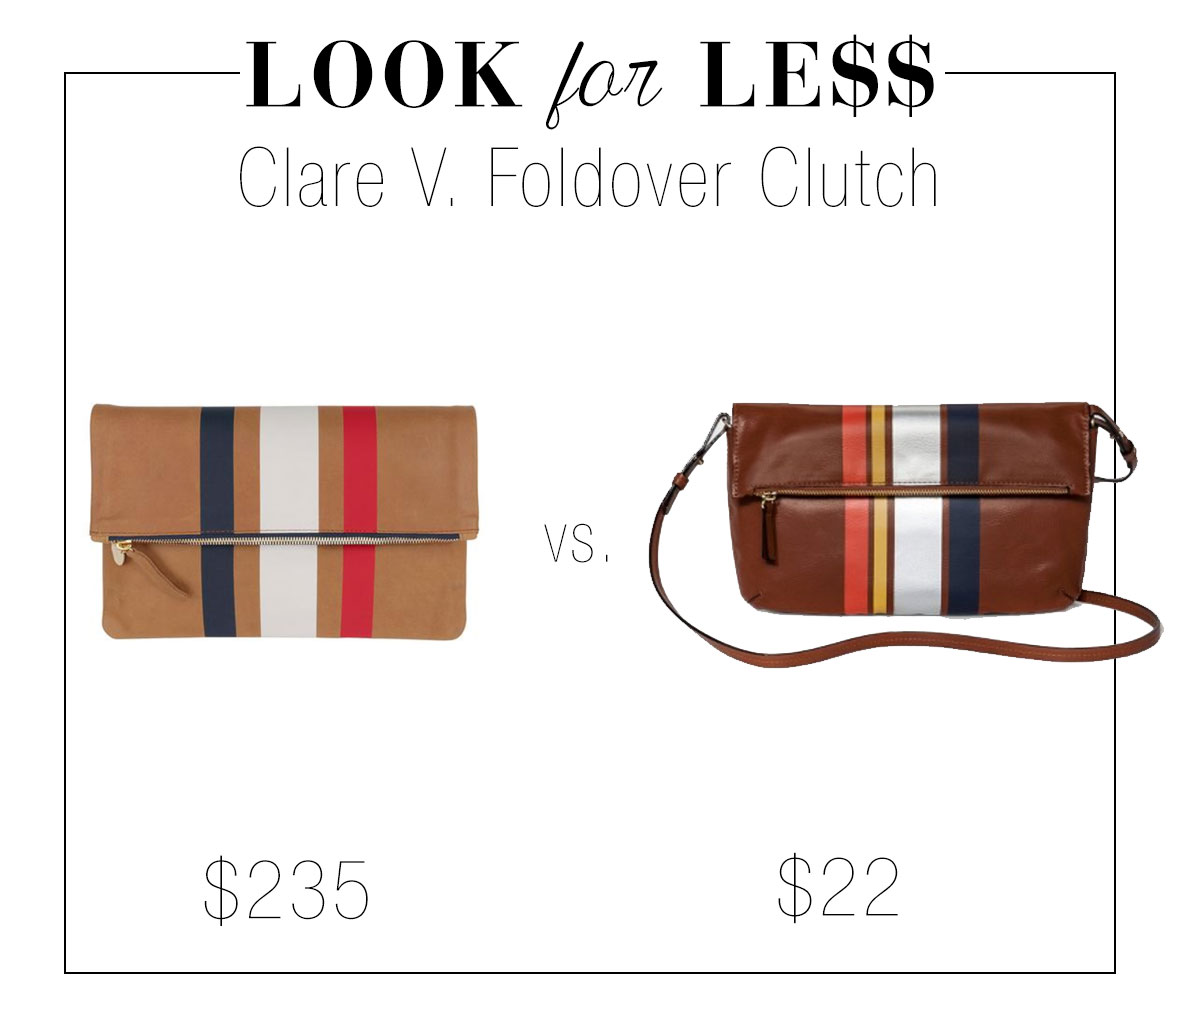 Clare V. striped clutch look for less